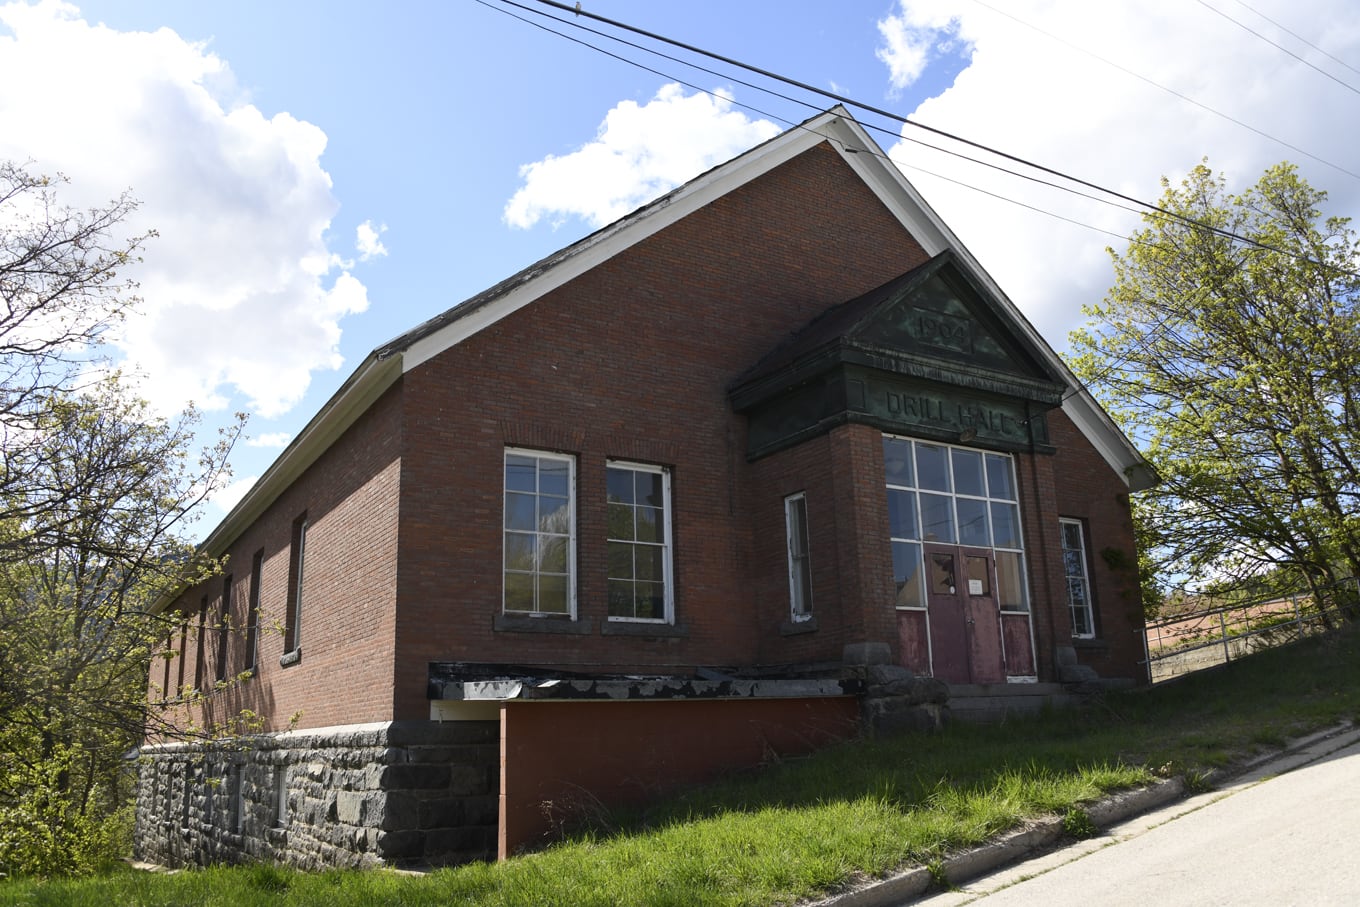 Rossland Arts Community aims for home in historic Drill Hall